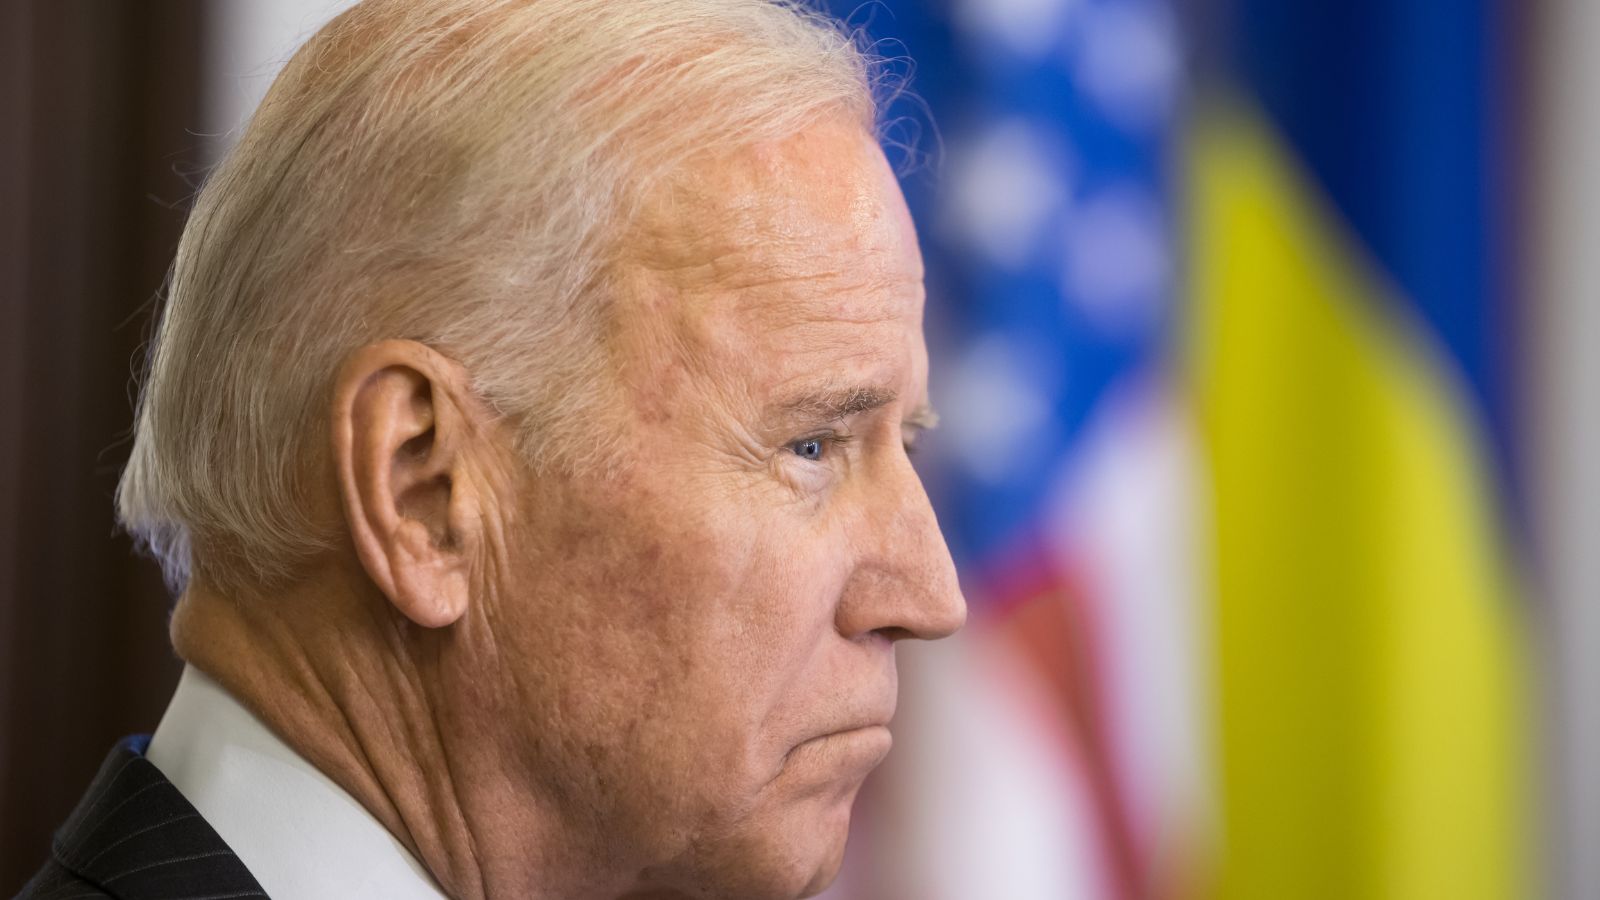 “It’s Unbelievable How Much He’s Degenerated”: Former White House Physician Claims Biden’s Age-Related Decline Is “Happening Quickly”